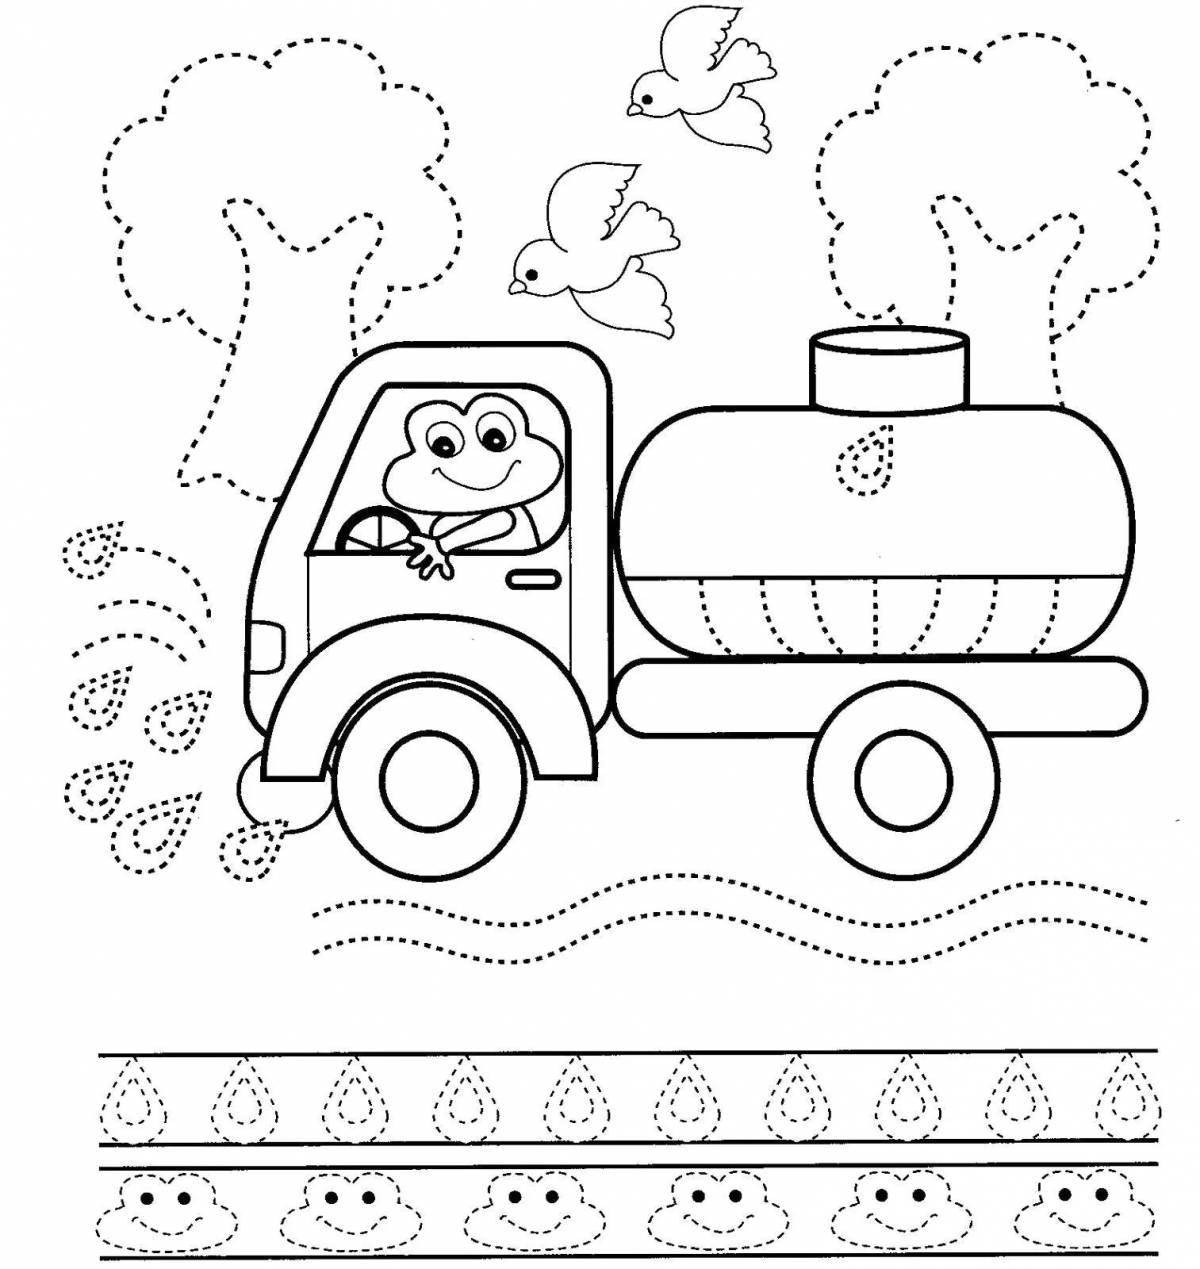 Educational coloring book for children 4 years old